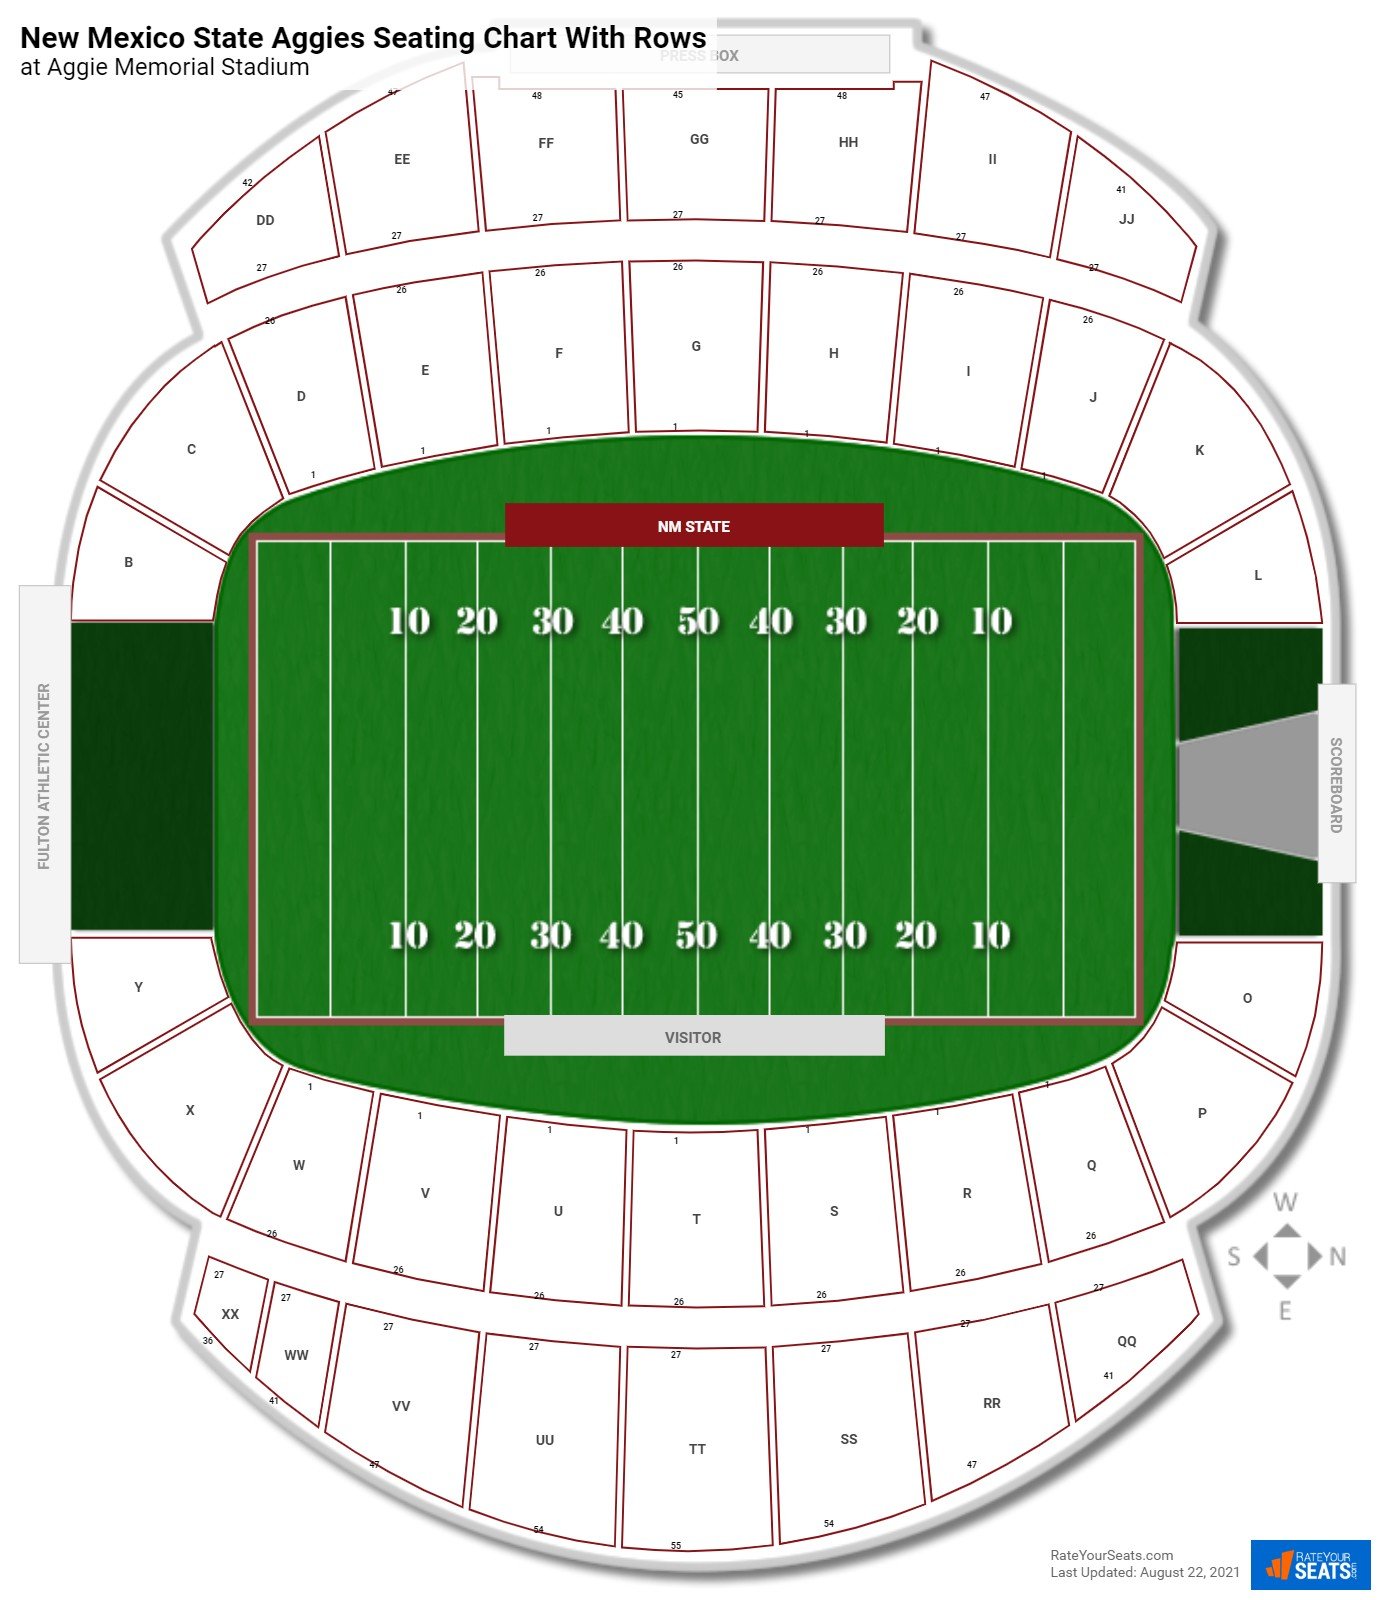 Aggie Memorial Stadium seating chart with row numbers